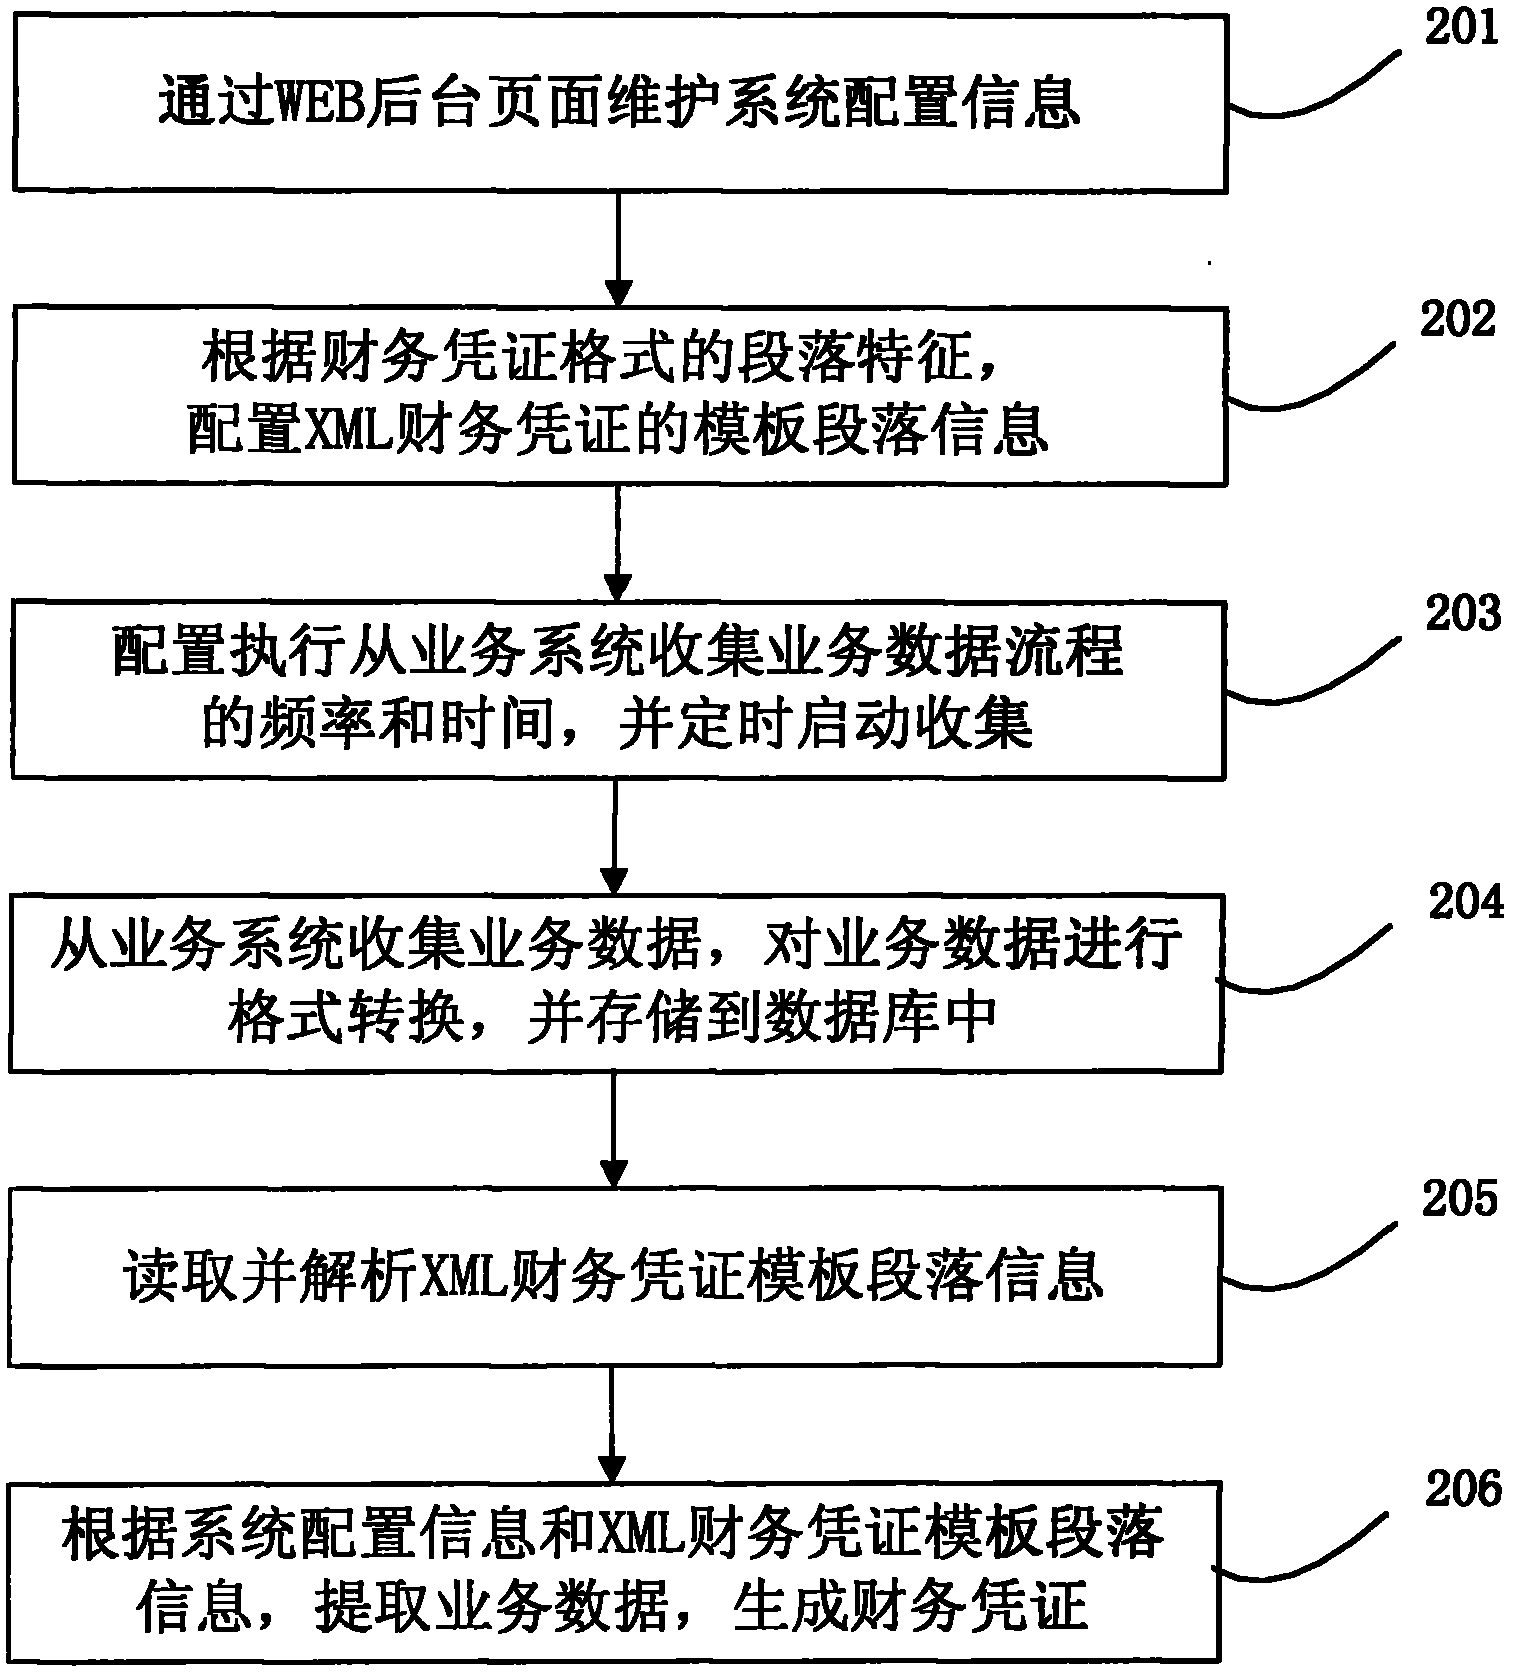 Financial certificate generating system and method